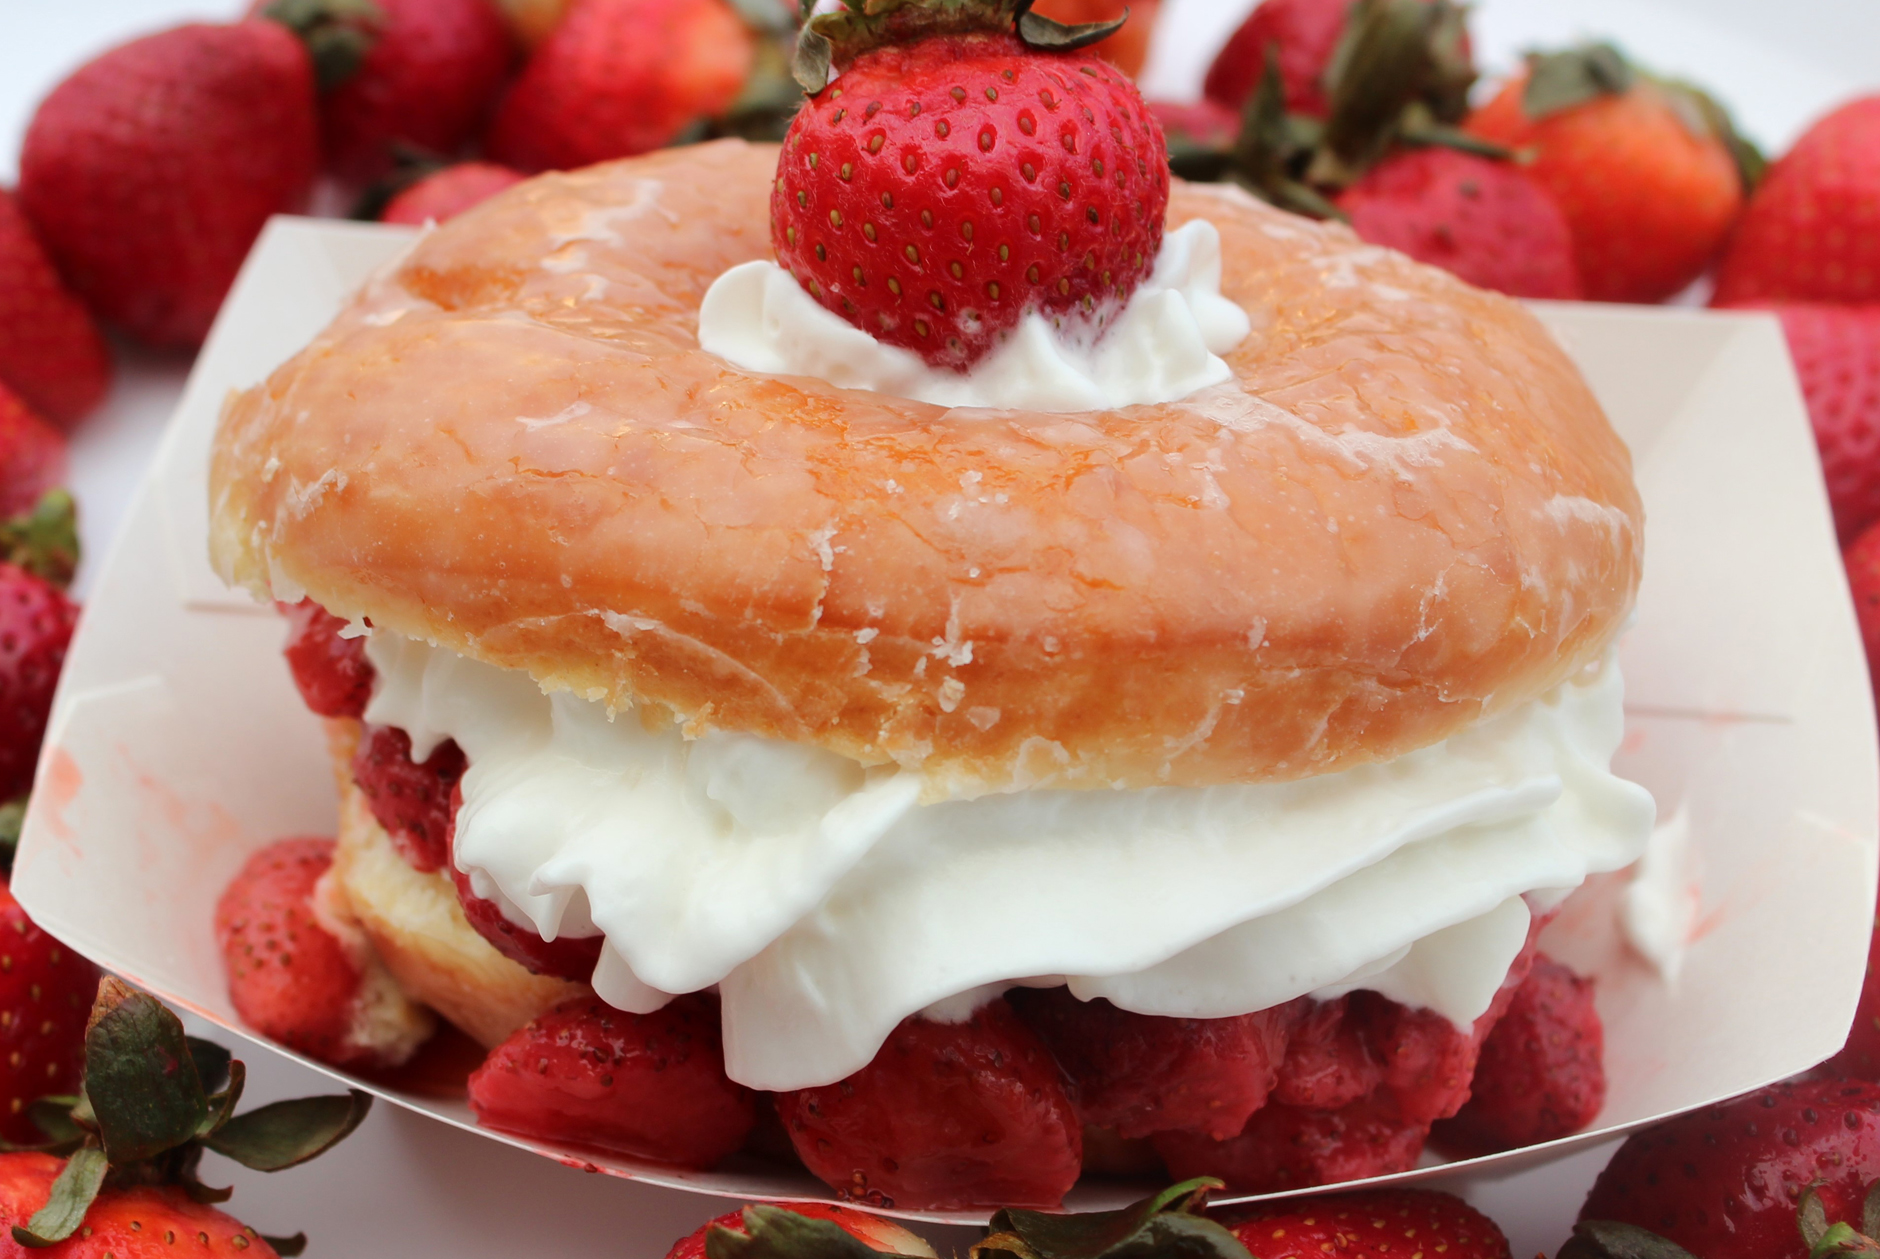 PHOTO: "Strawberry Donut Delight" will be featured at the 2016 Minnesota State Fair.